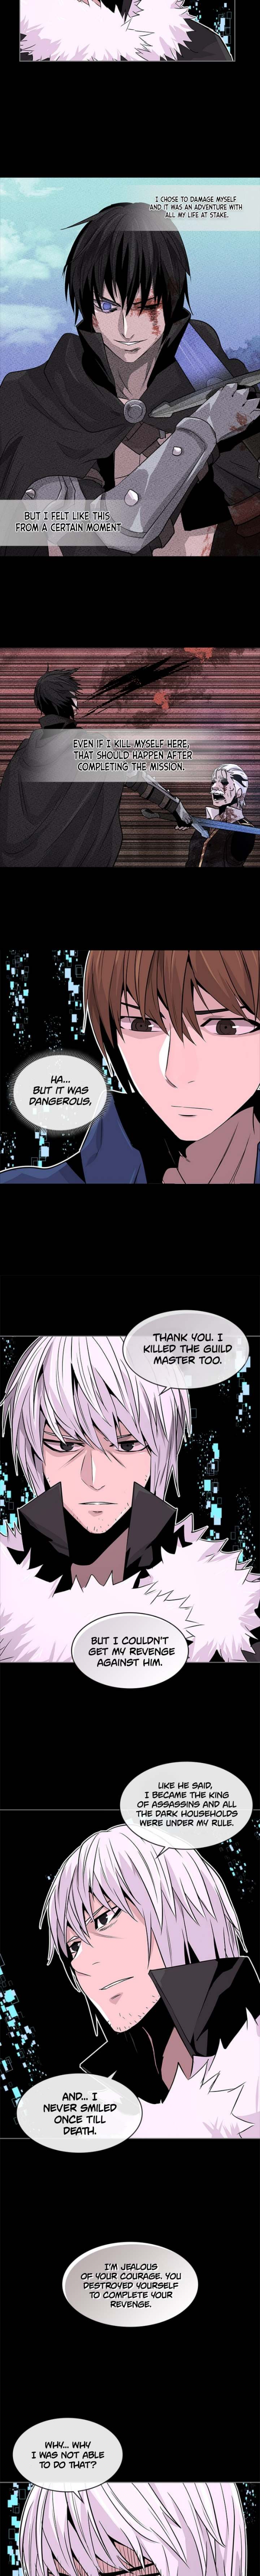 Dimensional Mercenary - Chapter 40 Page 7